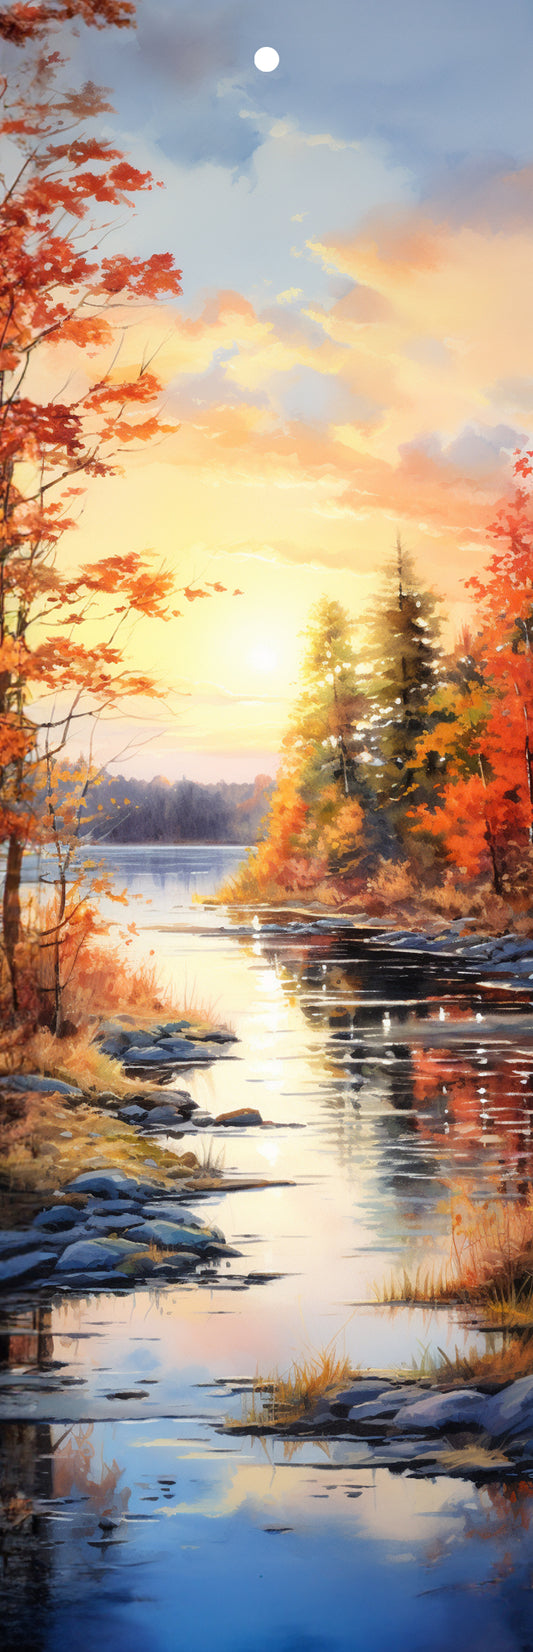 Sunset on a Lake in Fall